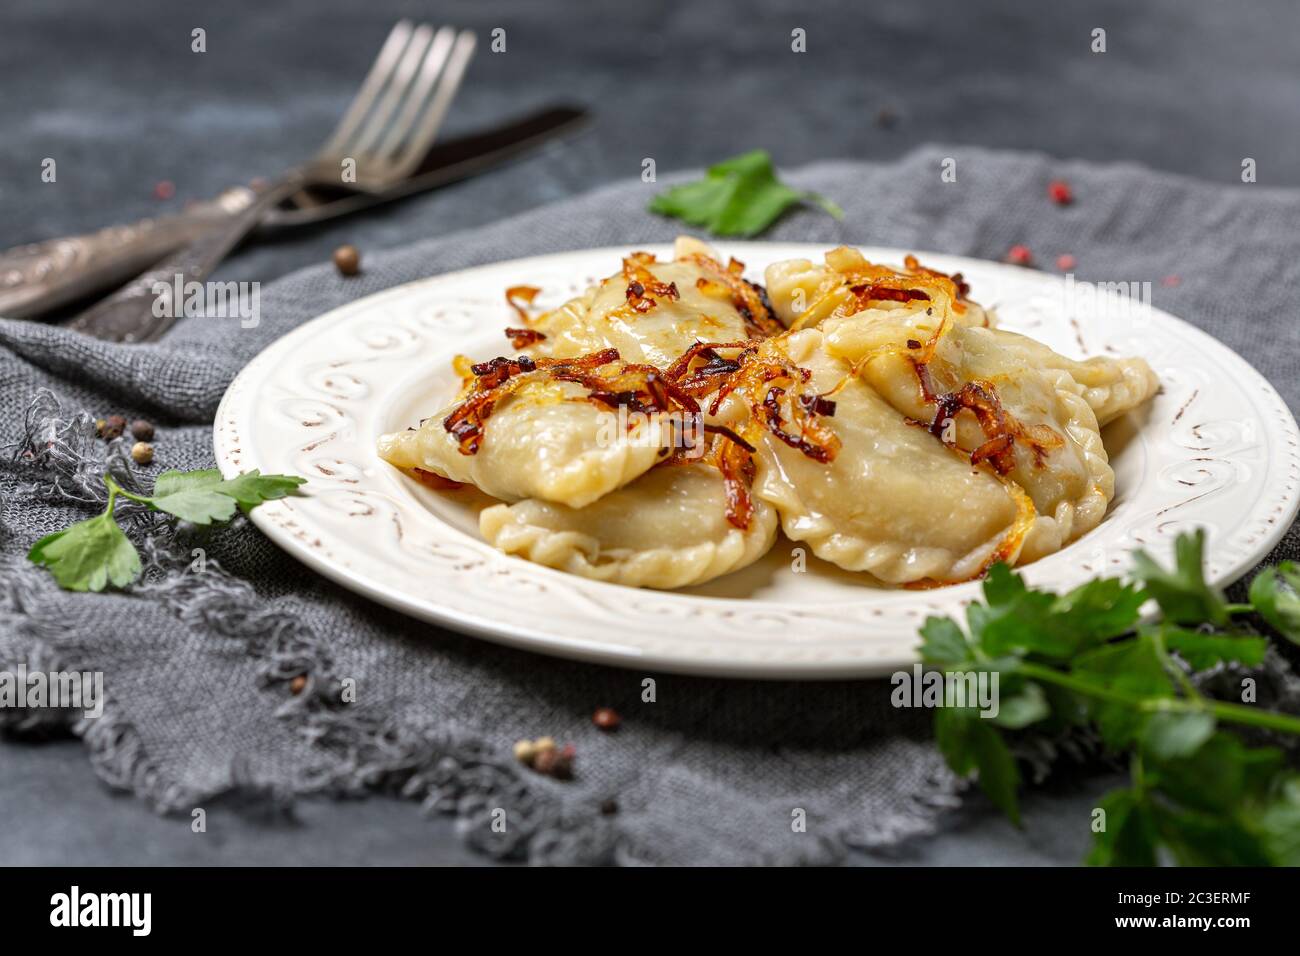 Dumplings with cabbage is a traditional dish of Eastern Europe. Stock Photo